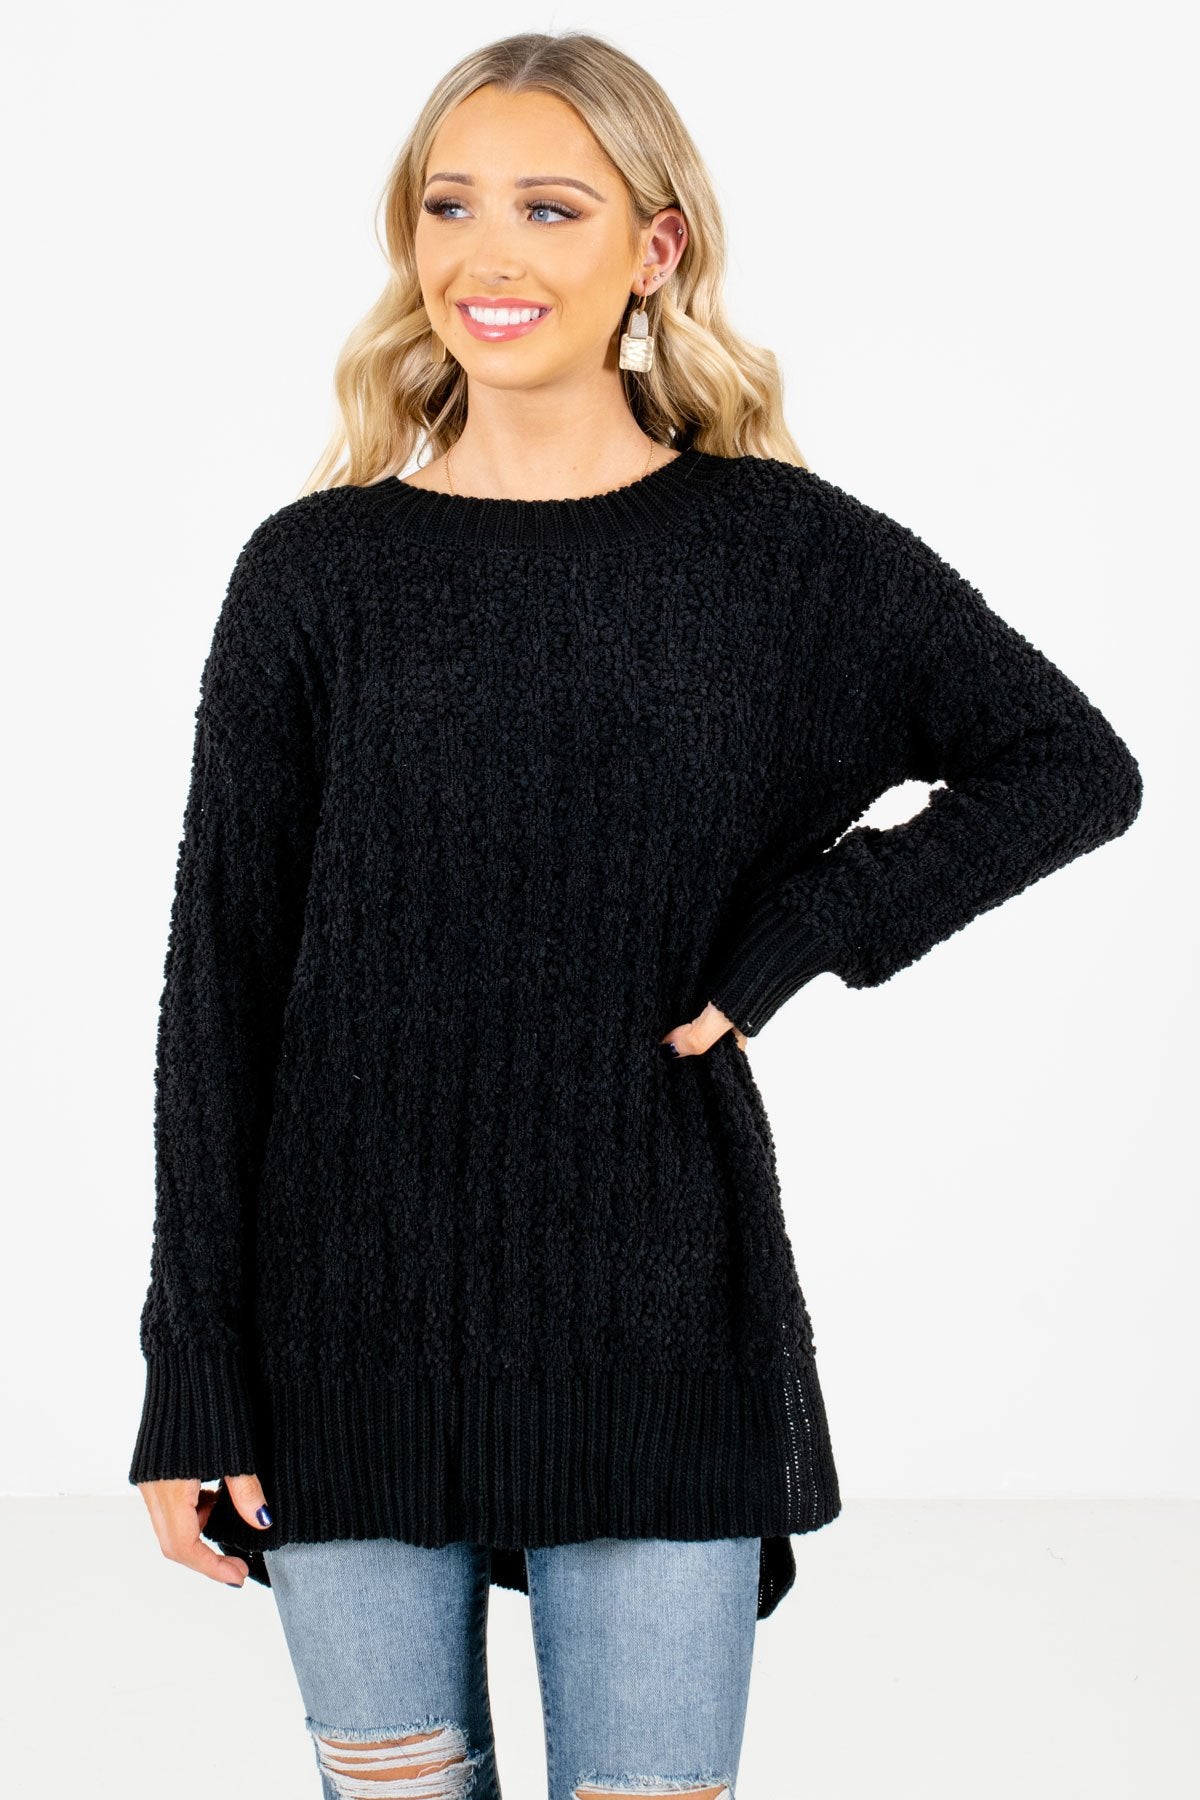 Black High-Quality Popcorn Knit Material Boutique Sweaters for Women